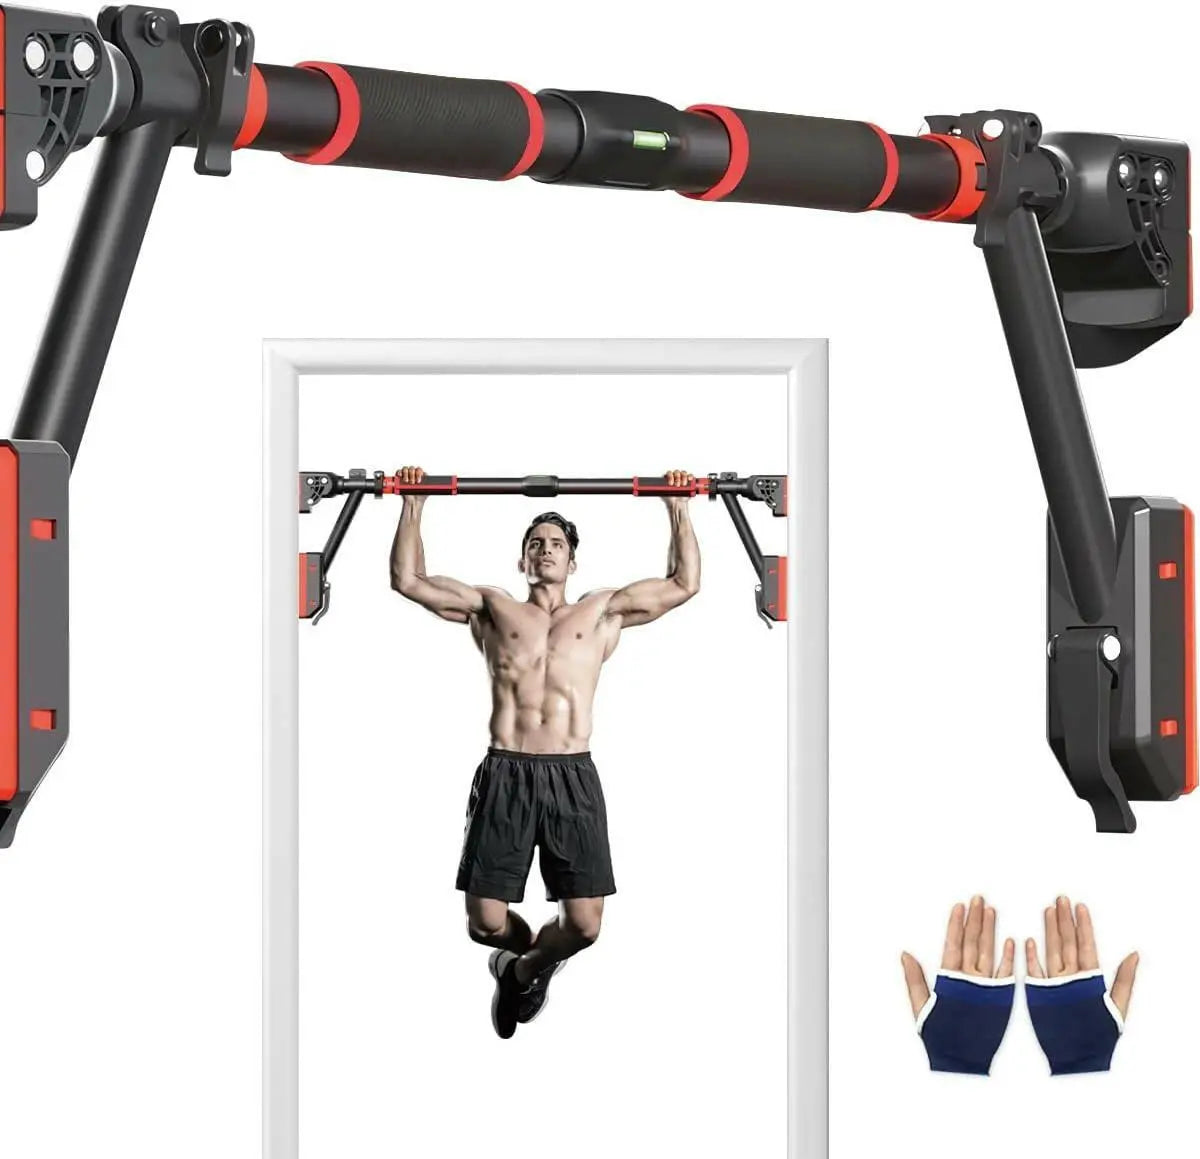 Pull Up Bar Doorway, Door Frame Chin Up Bar with Locking Adjustable Width Upper Body Workout Bar No Screw Wall Mounted Gym System Trainer Non-Slip